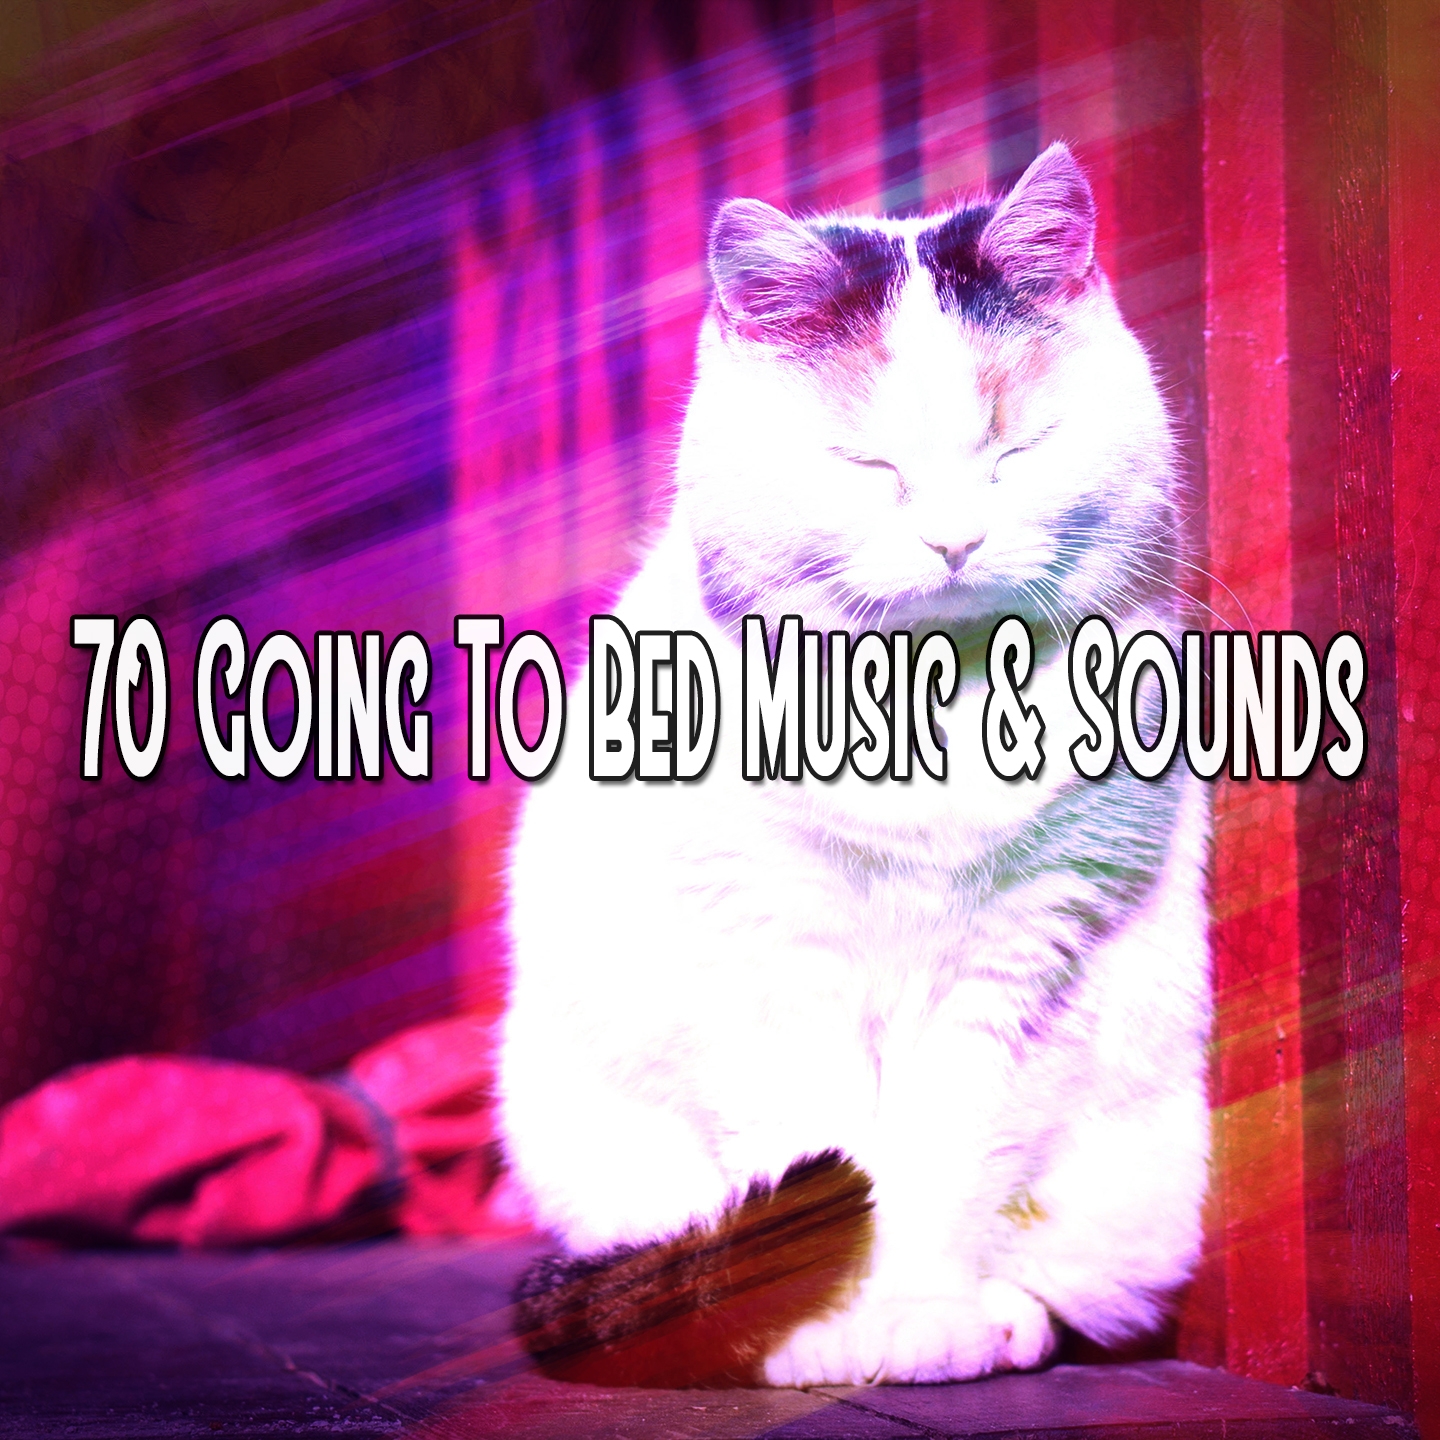 70 Going To Bed Music & Sounds